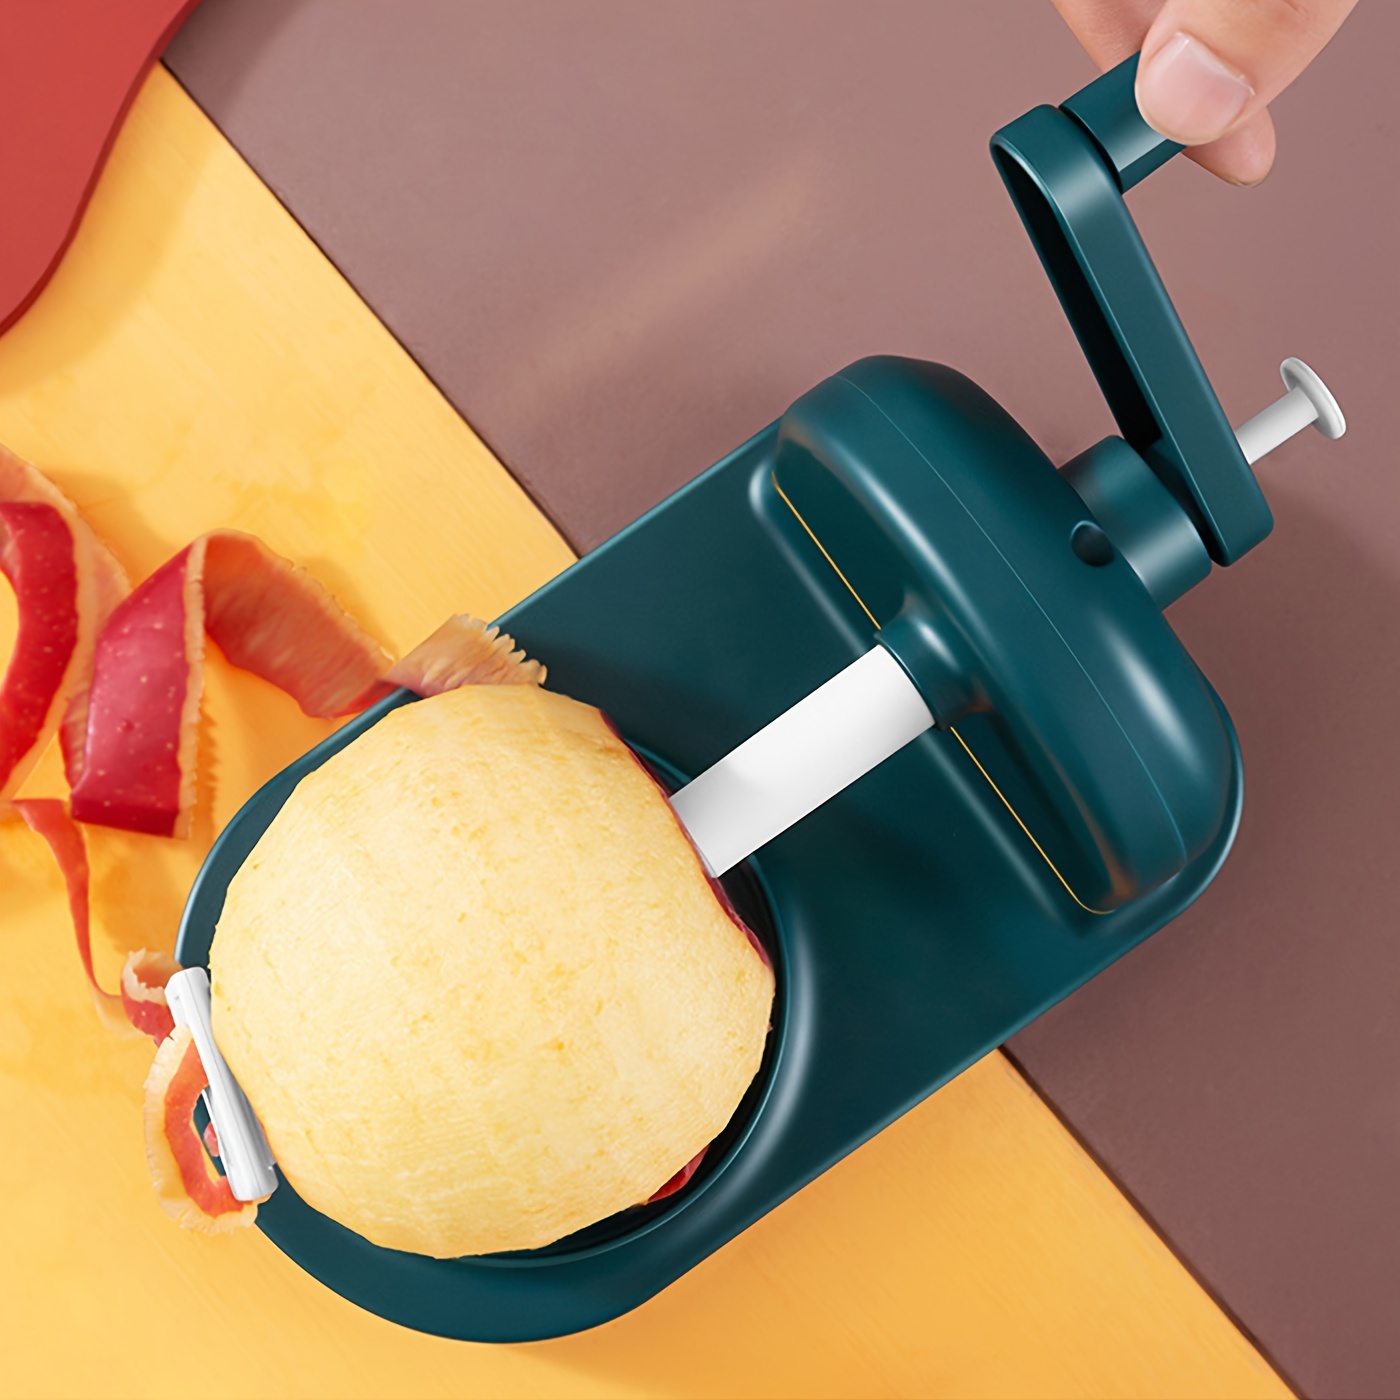 Electric Potato Peeler, Automatic Apple Peeler Machine, Heavy Duty  Stainless Steel Rotating Peeler with 2 Extra Blades for Kitchen Fruits and  Vegetables